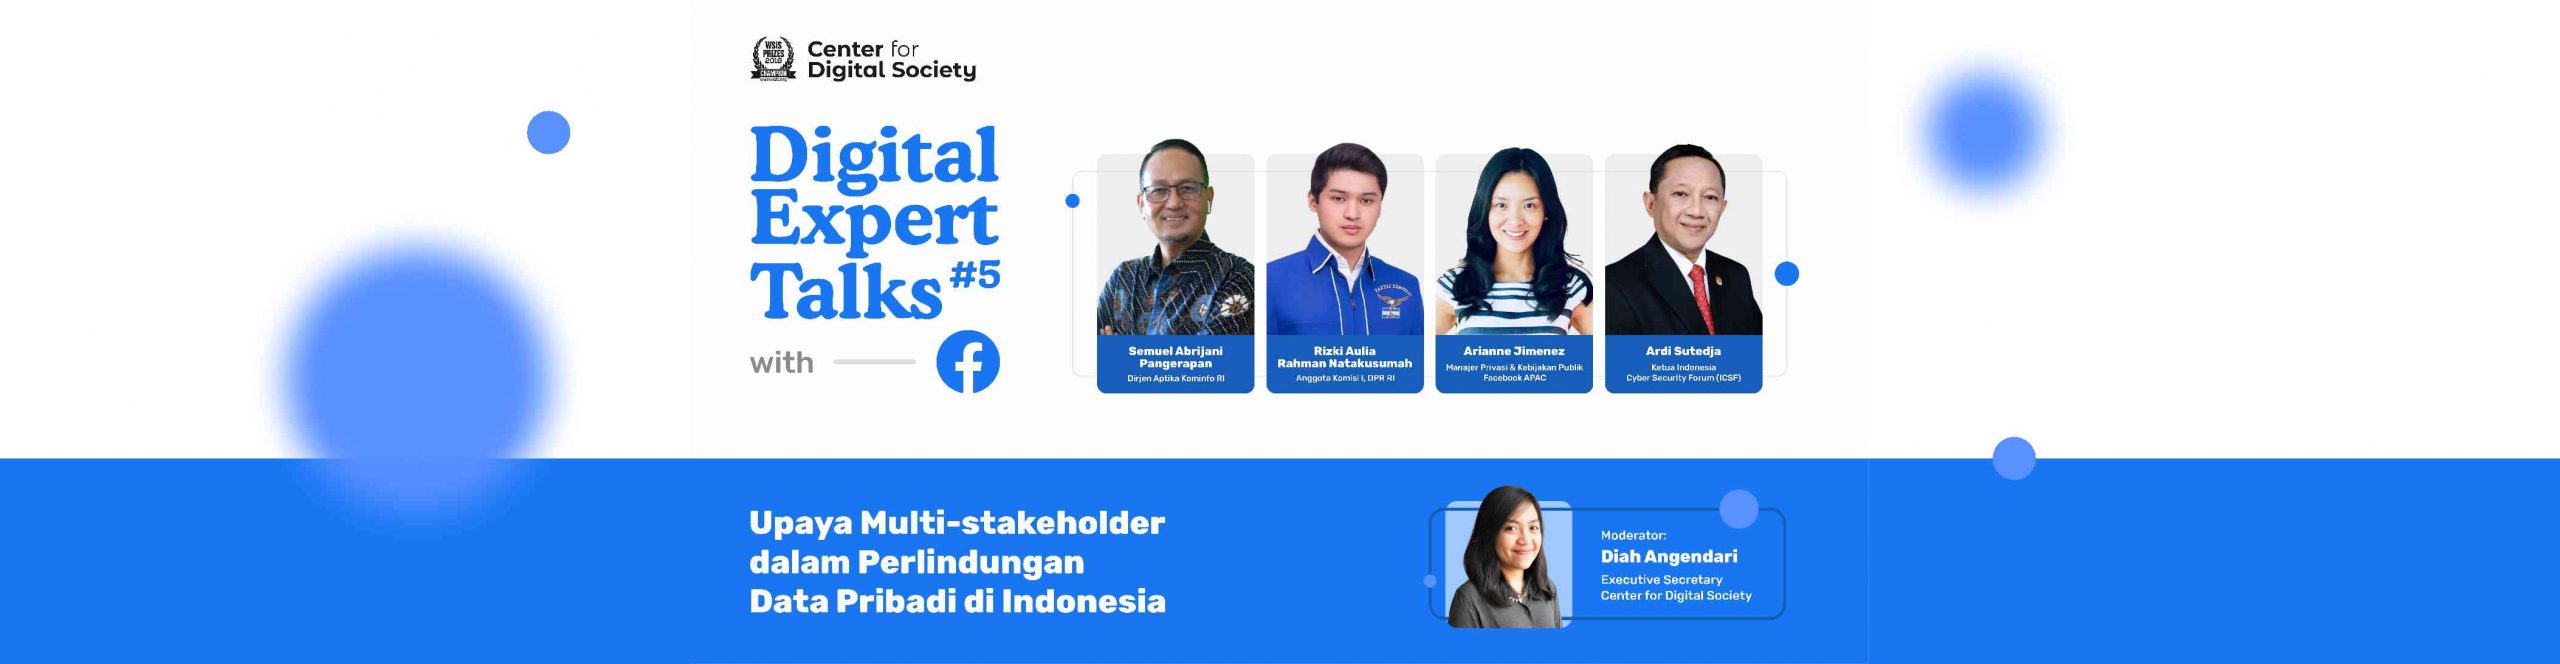 [PRESS RELEASE] Multi-Stakeholder Efforts in Personal Data Protection in Indonesia | Digital Expert Talks #6 with Meta